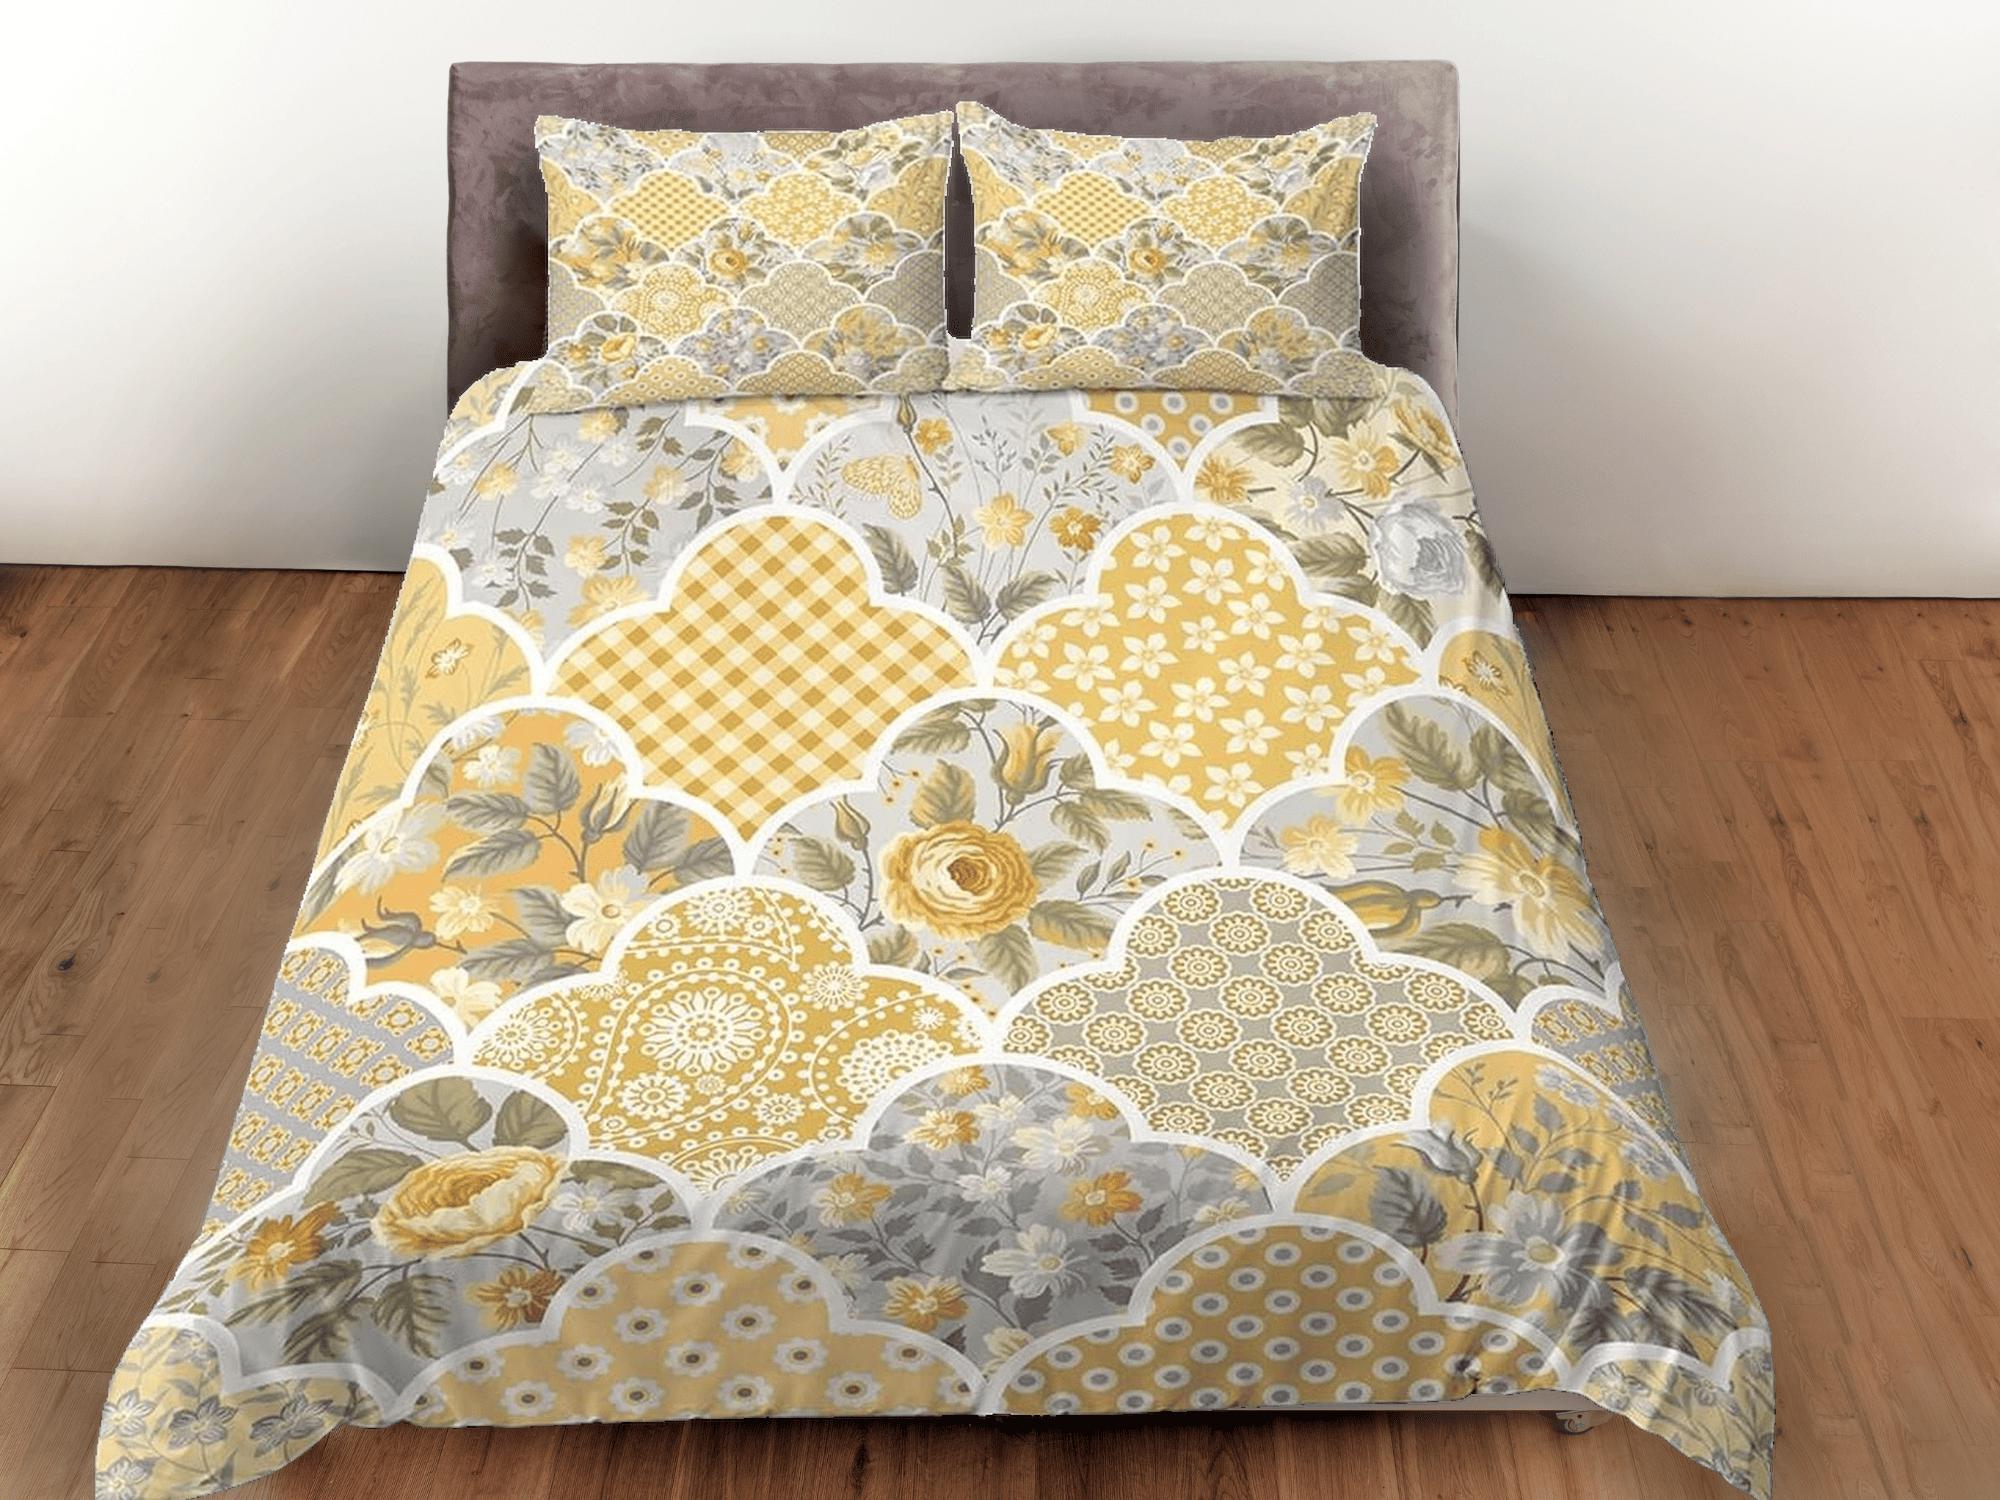 daintyduvet Yellow floral shabby chic patchwork quilt printed duvet cover set, aesthetic room decor bedding set full, king, queen size, boho bedspread